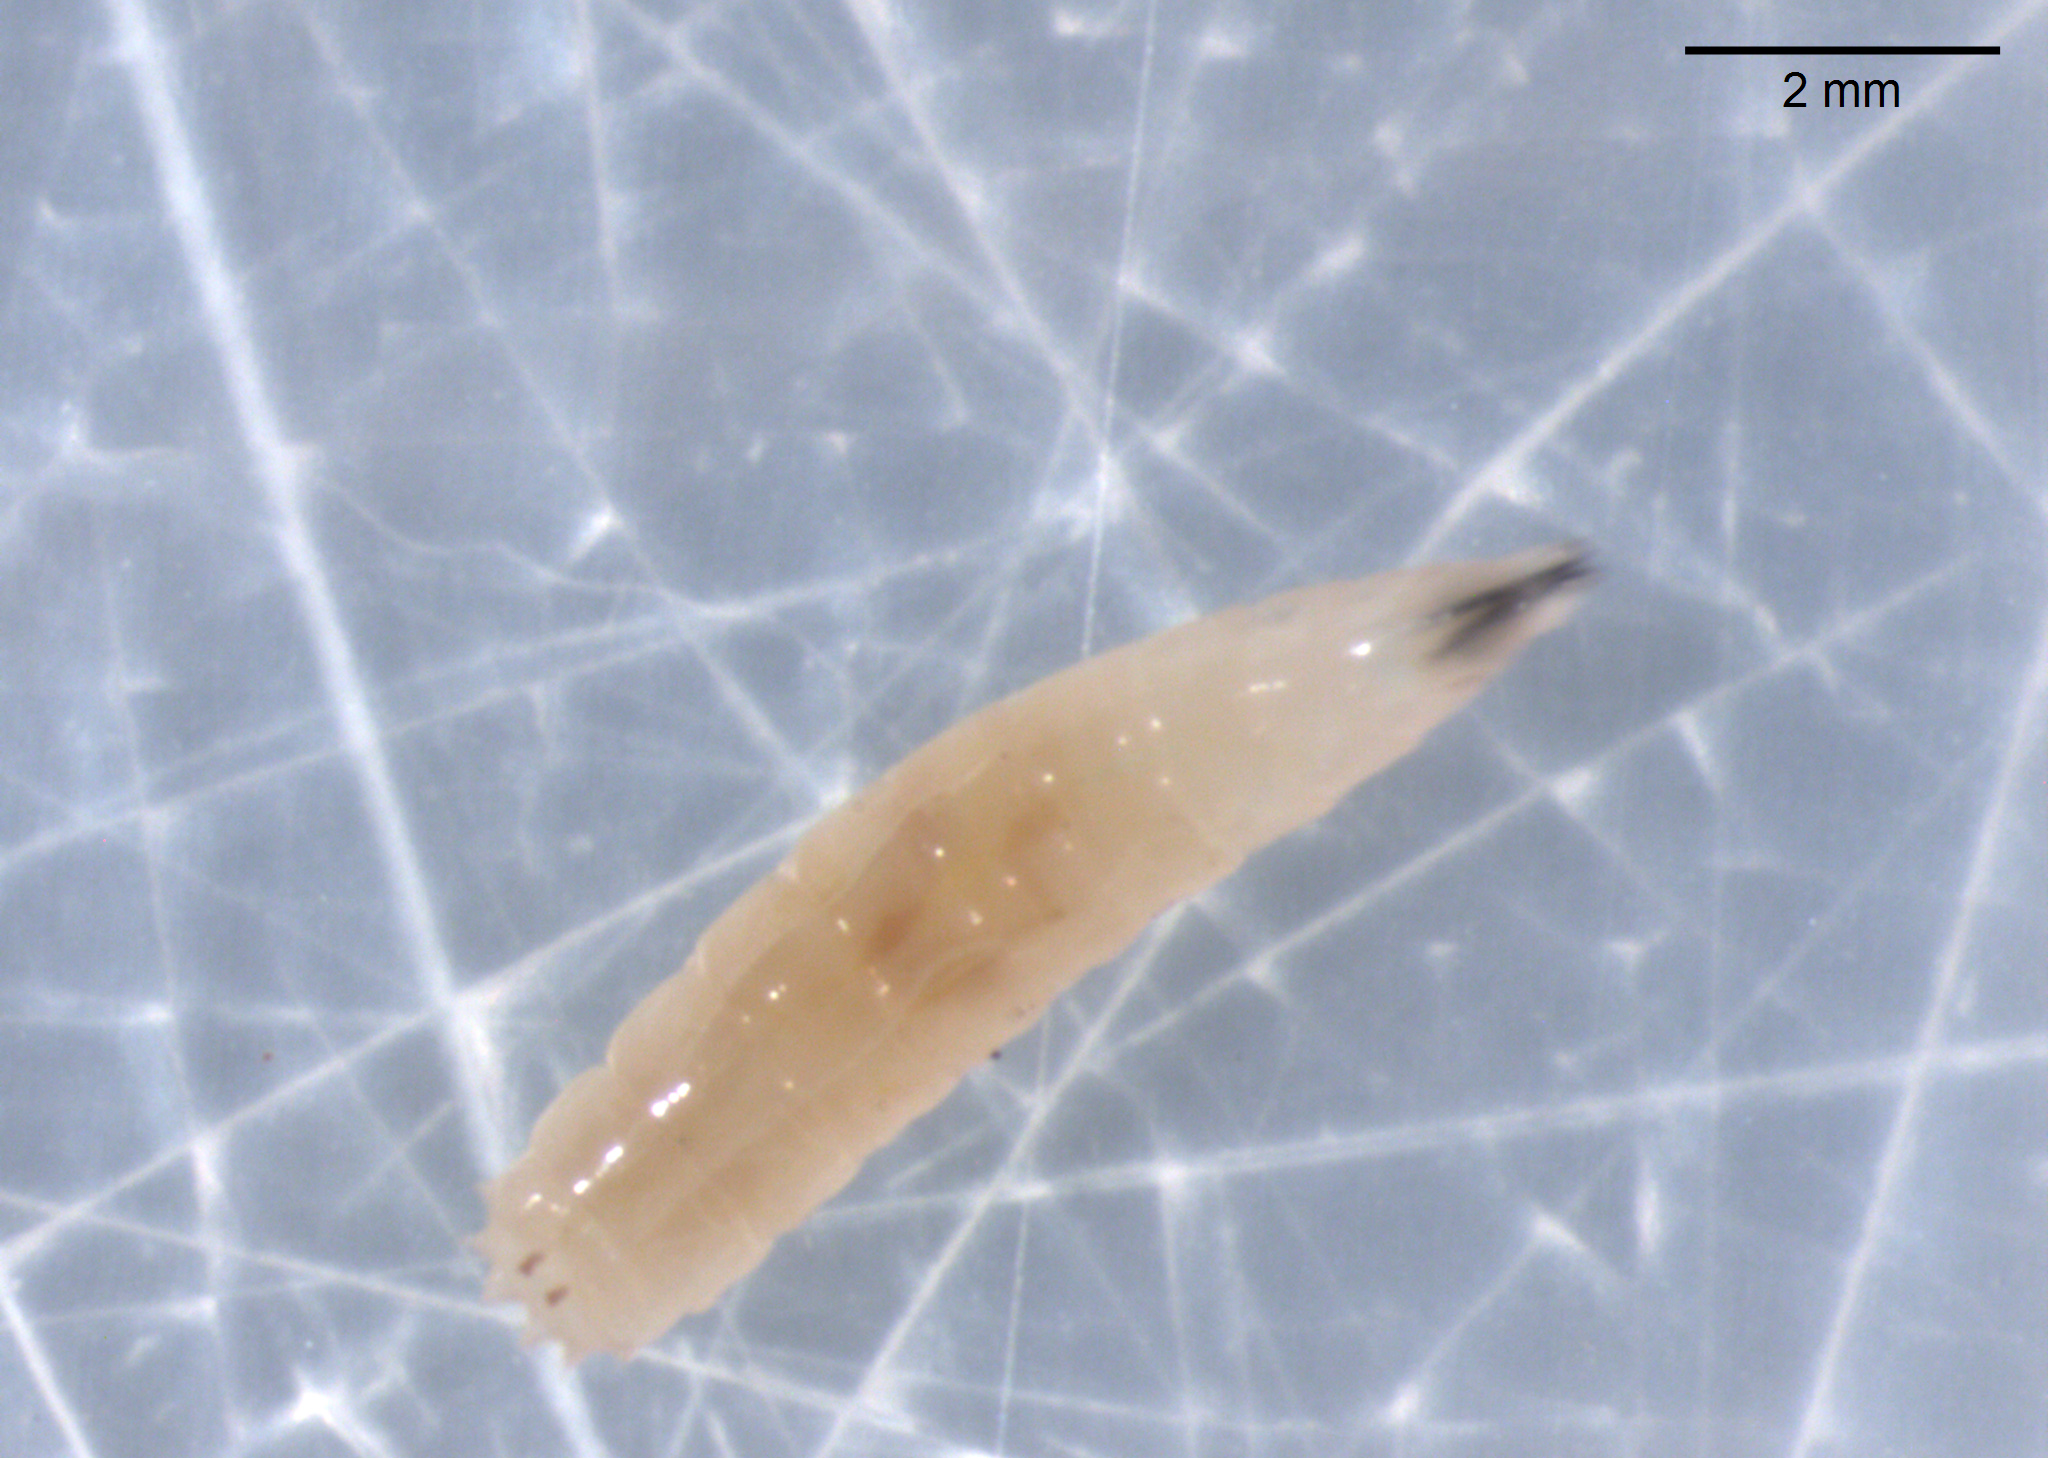 Magnified image of a seedcorn maggot.